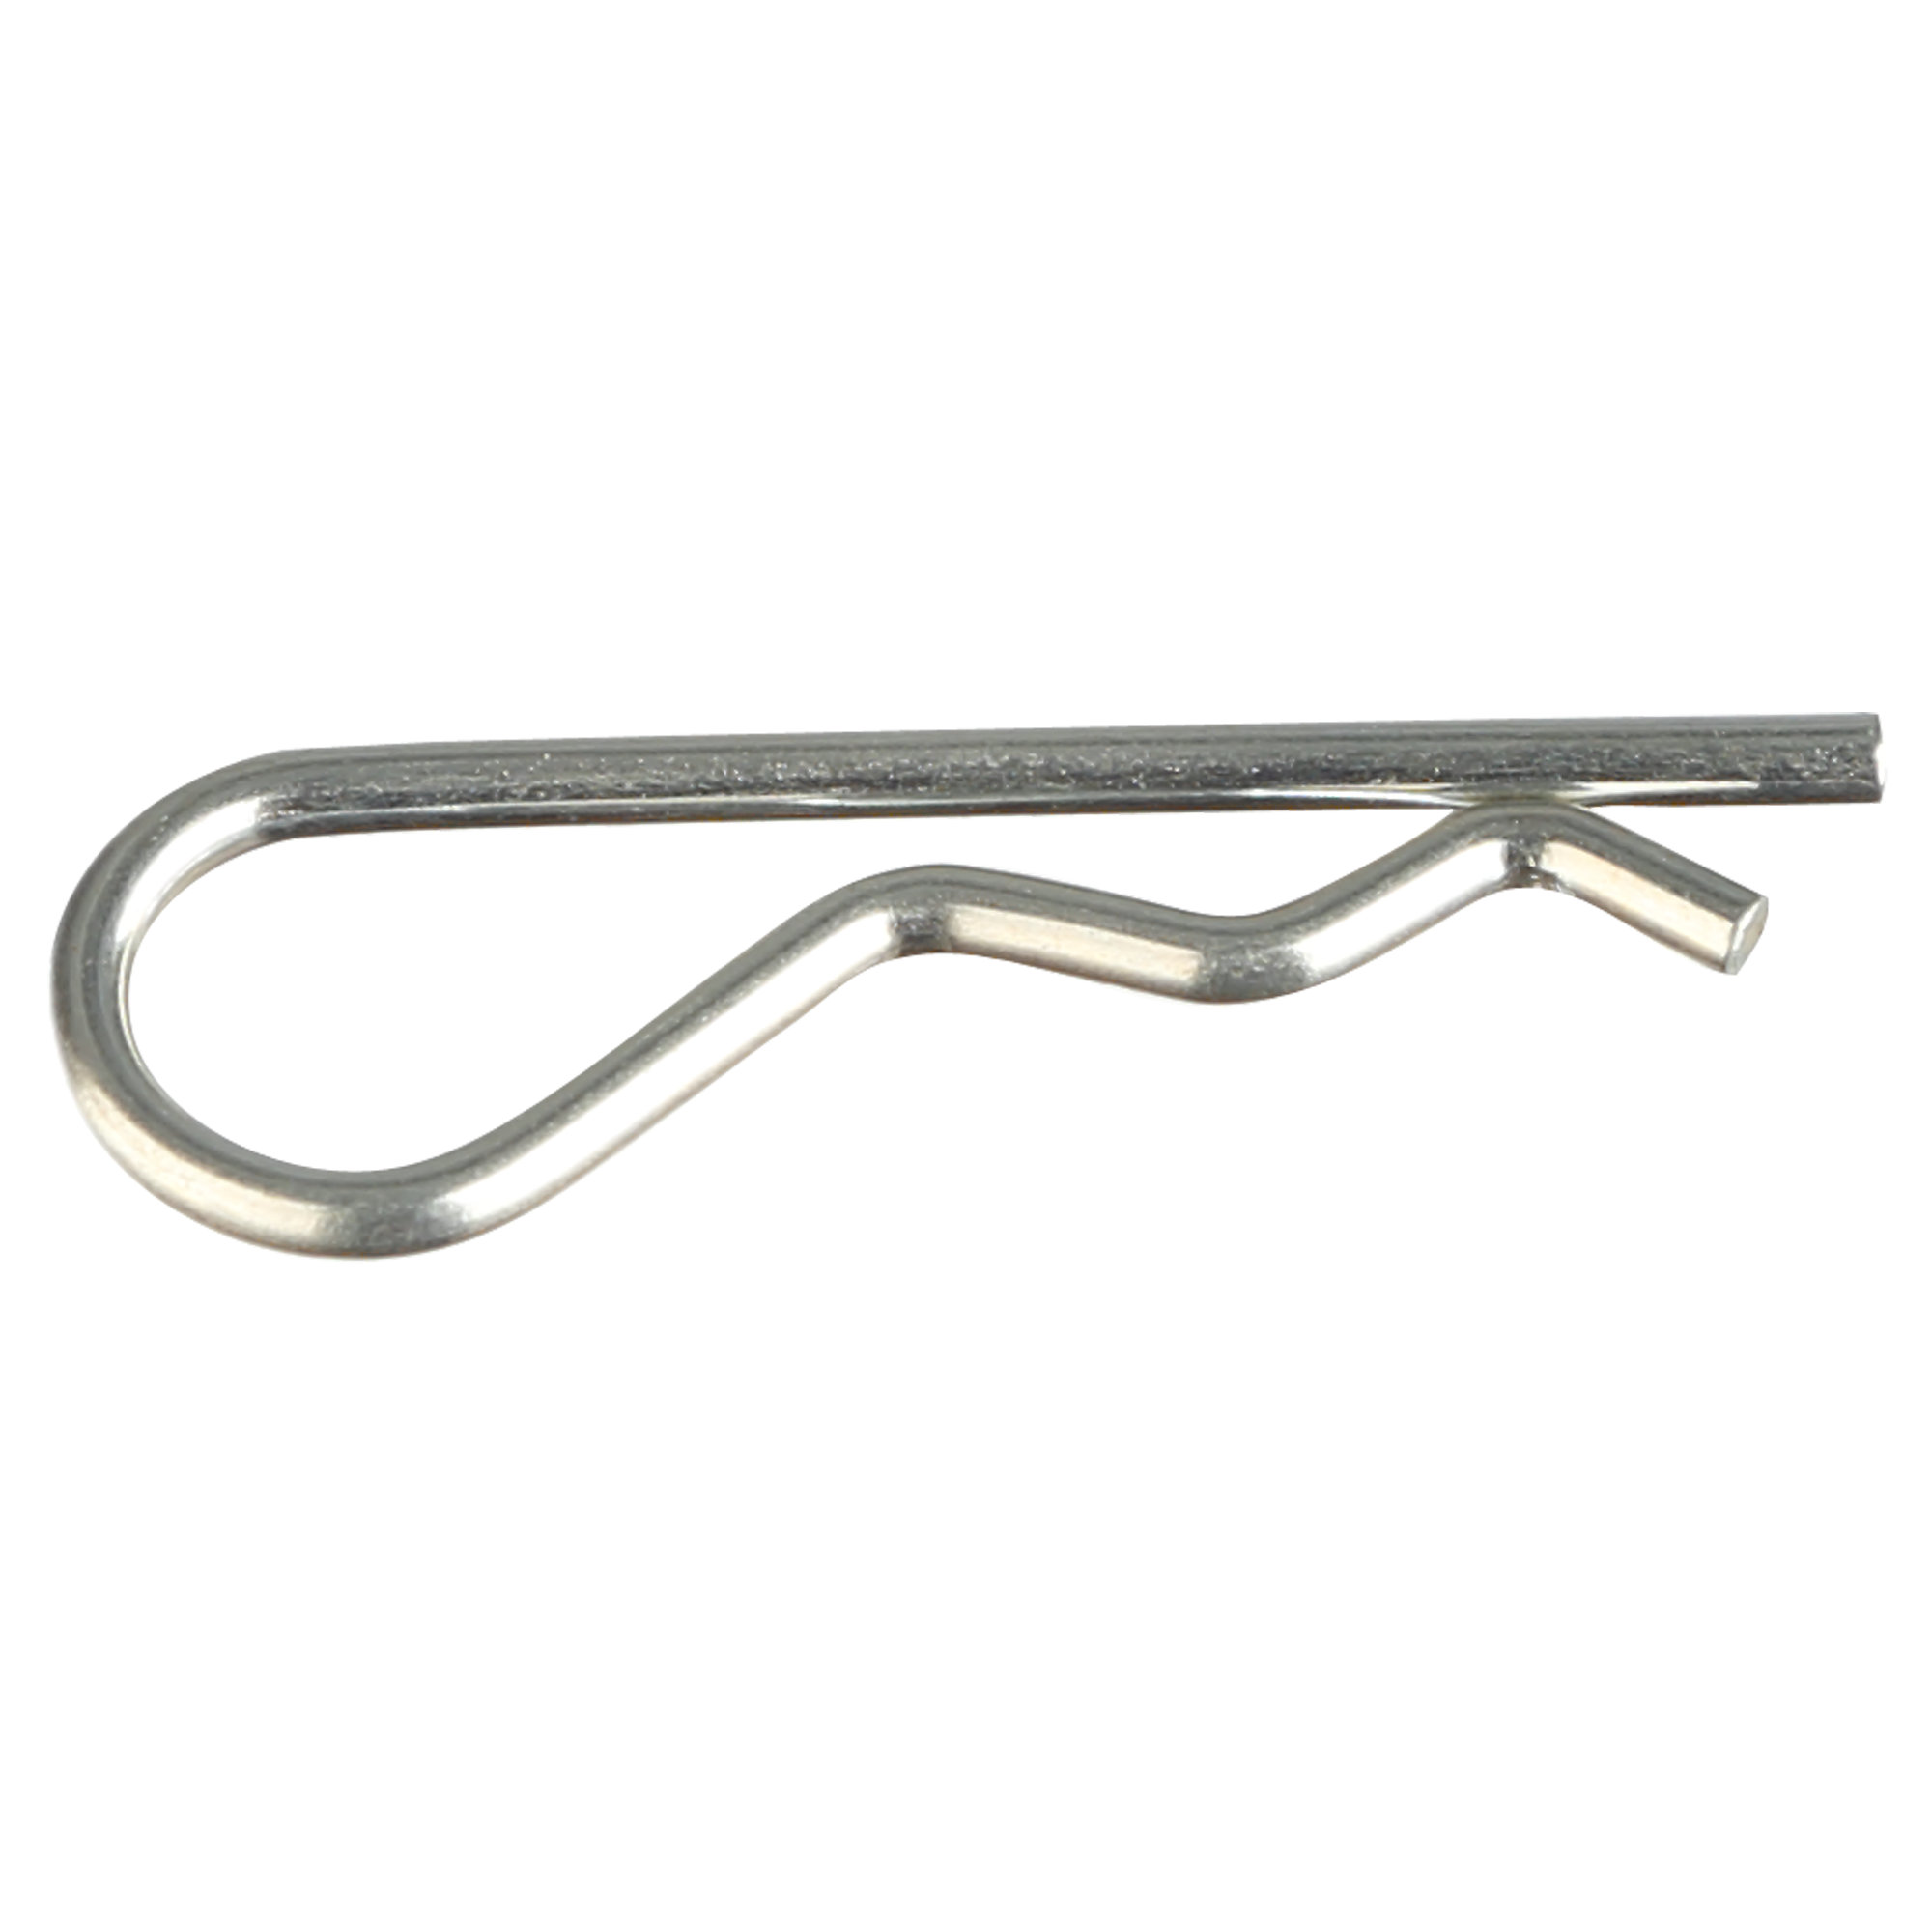 Clip, Clevis Pin, 3/8